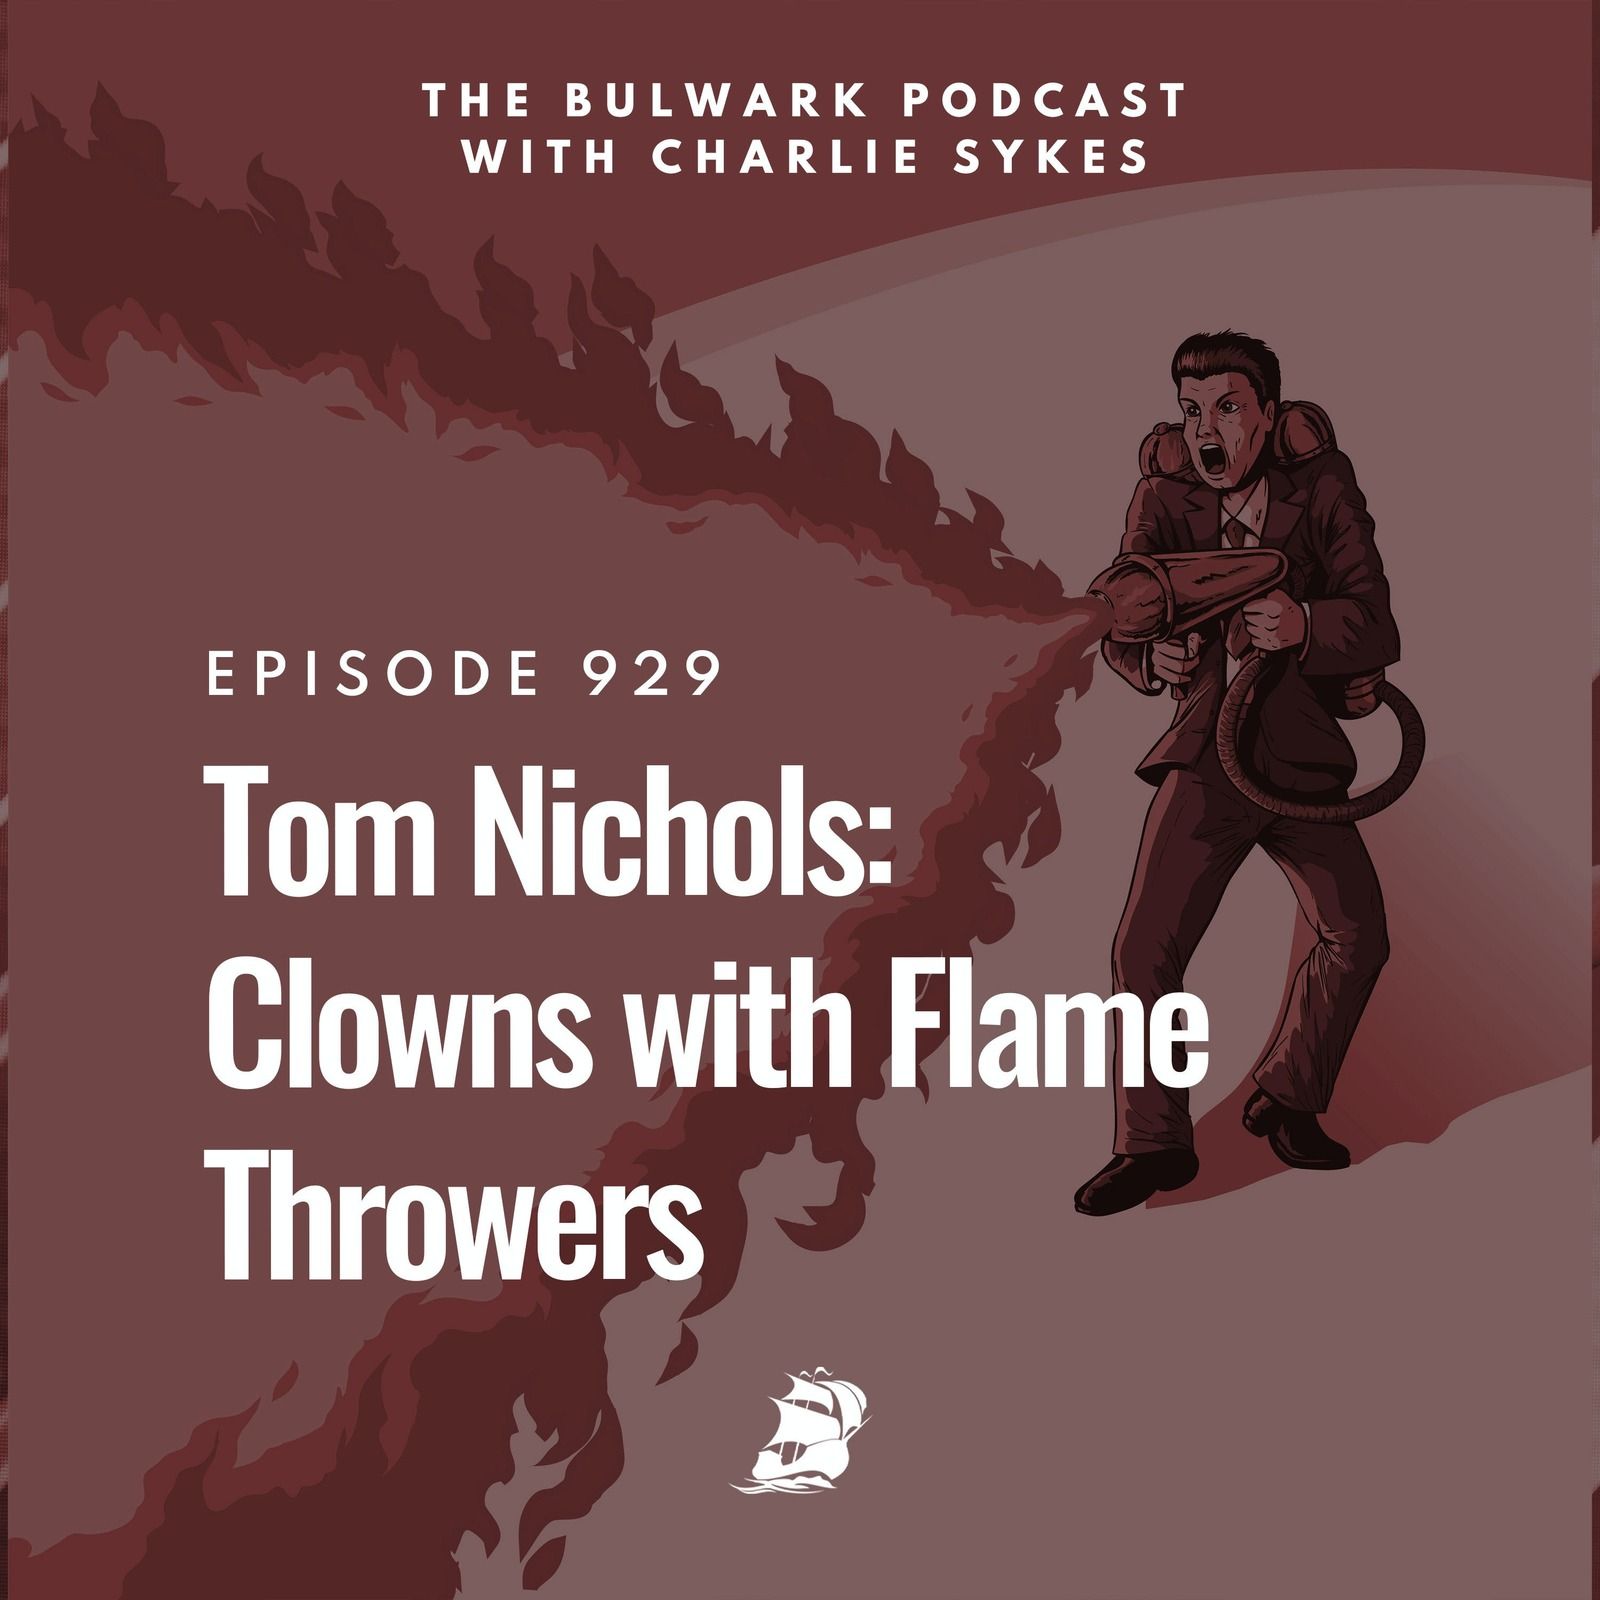 Tom Nichols: Clowns with Flame Throwers by The Bulwark Podcast